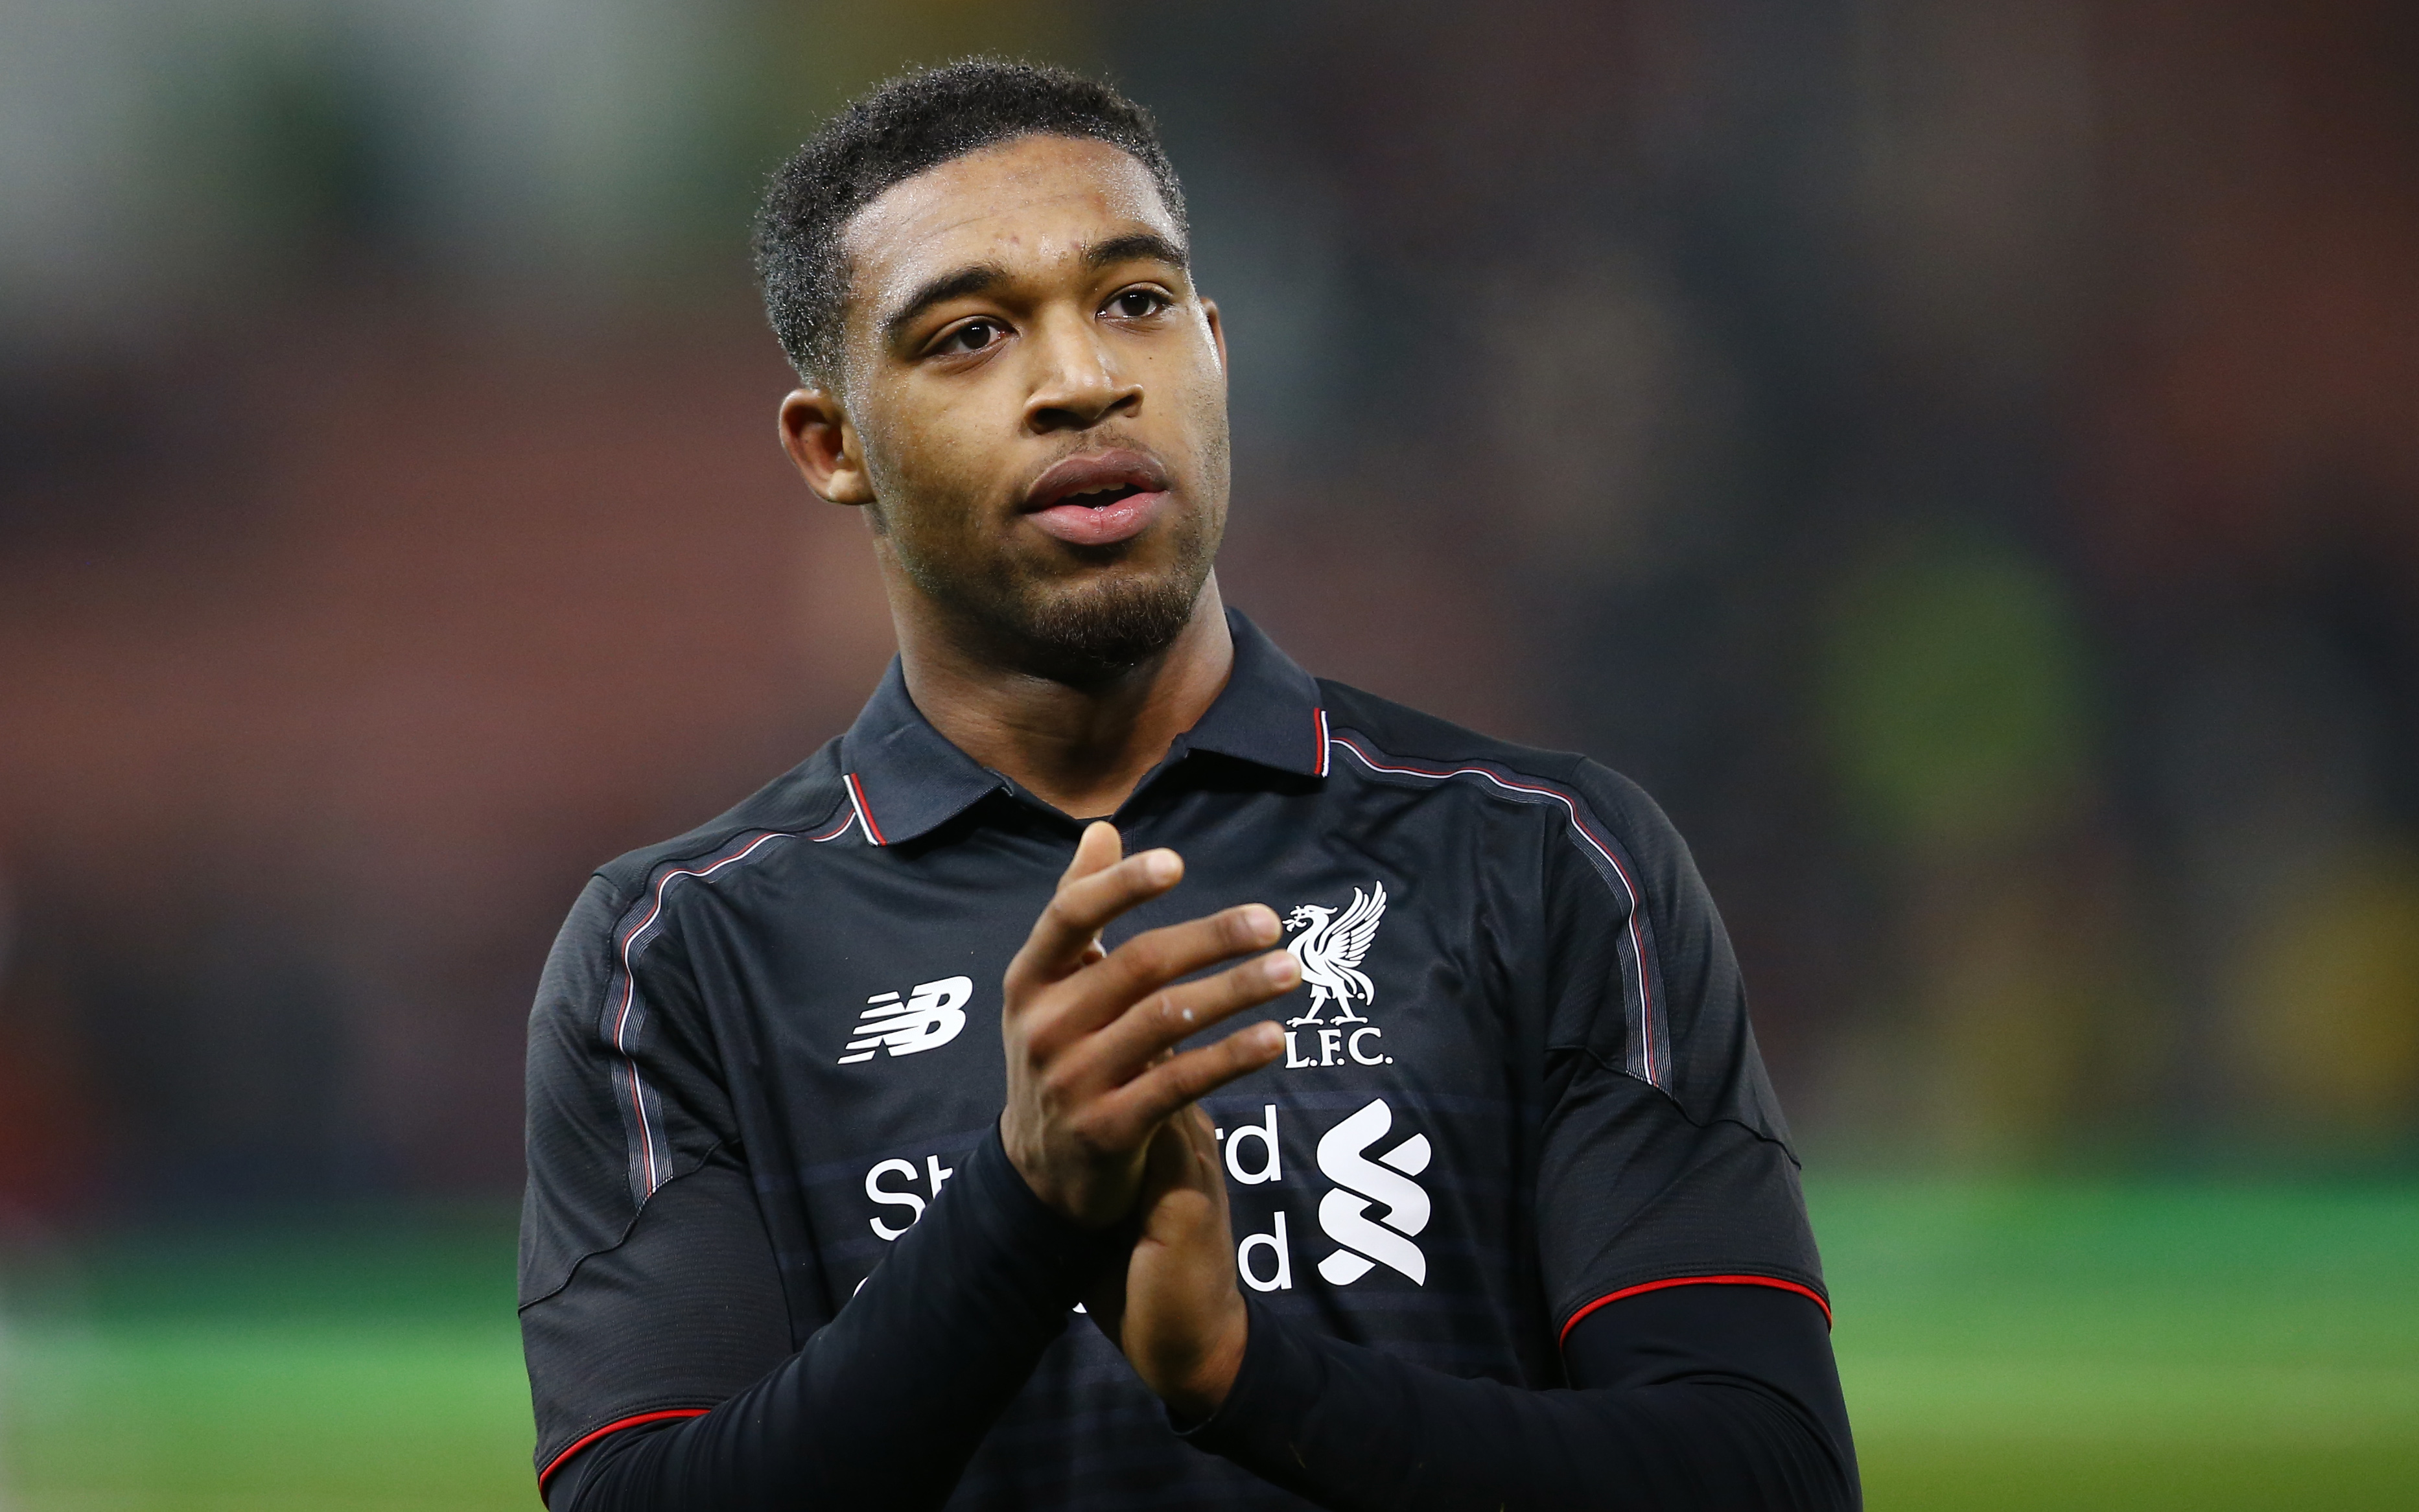 Liverpool's Jordon Ibe applauds the fans at the end of the match against Stoke City at Britannia stadium during the first leg of League Cup on Tuesday, January 5, 2016. Photo: Reuters